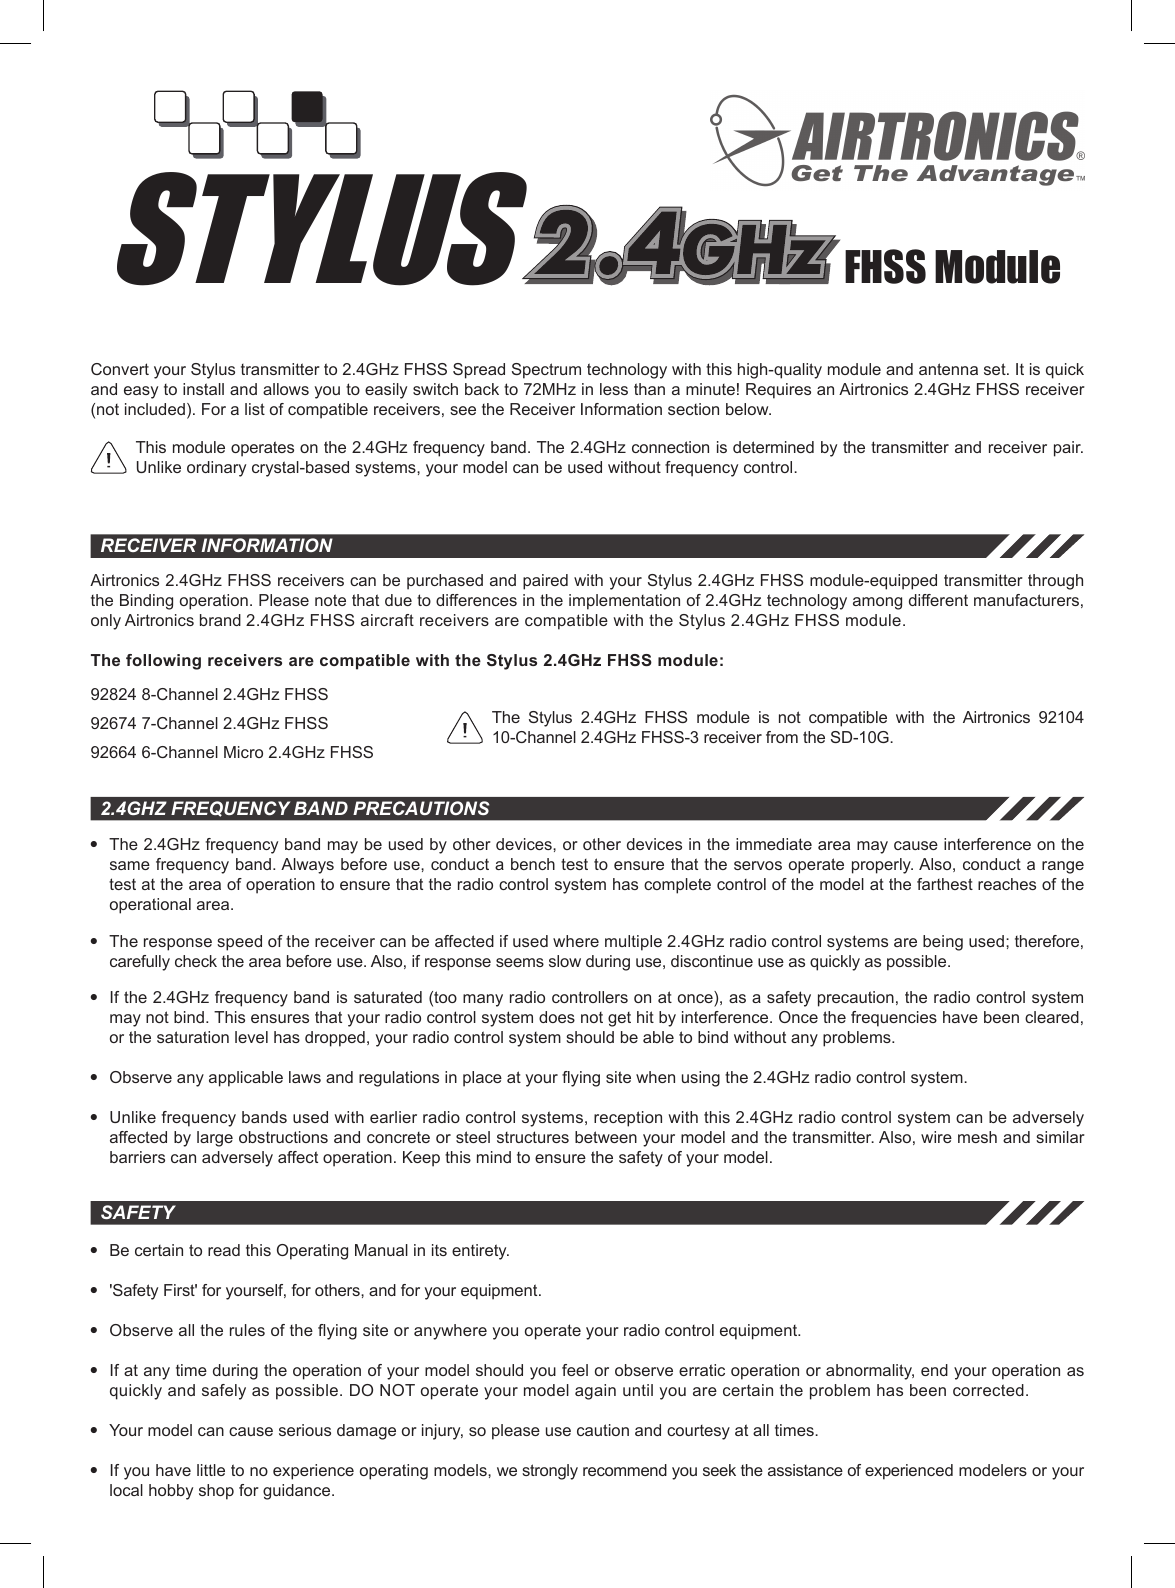 STYLUSreceiver informationFHSS ModuleAirtronics 2.4GHz FHSS receivers can be purchased and paired with your Stylus 2.4GHz FHSS module-equipped transmitter through the Binding operation. Please note that due to differences in the implementation of 2.4GHz technology among different manufacturers, only Airtronics brand 2.4GHz FHSS aircraft receivers are compatible with the Stylus 2.4GHz FHSS module.The following receivers are compatible with the Stylus 2.4GHz FHSS module:92824 8-Channel 2.4GHz FHSS92674 7-Channel 2.4GHz FHSS92664 6-Channel Micro 2.4GHz FHSS2.4GHz frequency Band Precautionsl  The 2.4GHz frequency band may be used by other devices, or other devices in the immediate area may cause interference on the same frequency band. Always before use, conduct a bench test to ensure that the servos operate properly. Also, conduct a range test at the area of operation to ensure that the radio control system has complete control of the model at the farthest reaches of the operational area.l  The response speed of the receiver can be affected if used where multiple 2.4GHz radio control systems are being used; therefore, carefully check the area before use. Also, if response seems slow during use, discontinue use as quickly as possible.l  If the 2.4GHz frequency band is saturated (too many radio controllers on at once), as a safety precaution, the radio control system may not bind. This ensures that your radio control system does not get hit by interference. Once the frequencies have been cleared, or the saturation level has dropped, your radio control system should be able to bind without any problems.l Observeanyapplicablelawsandregulationsinplaceatyouryingsitewhenusingthe2.4GHzradiocontrolsystem.l  Unlike frequency bands used with earlier radio control systems, reception with this 2.4GHz radio control system can be adversely affected by large obstructions and concrete or steel structures between your model and the transmitter. Also, wire mesh and similar barriers can adversely affect operation. Keep this mind to ensure the safety of your model.This module operates on the 2.4GHz frequency band. The 2.4GHz connection is determined by the transmitter and receiver pair. Unlike ordinary crystal-based systems, your model can be used without frequency control.l  Be certain to read this Operating Manual in its entirety.l  &apos;Safety First&apos; for yourself, for others, and for your equipment.l Observealltherulesoftheyingsiteoranywhereyouoperateyourradiocontrolequipment.l  If at any time during the operation of your model should you feel or observe erratic operation or abnormality, end your operation as quickly and safely as possible. DO NOT operate your model again until you are certain the problem has been corrected.l  Your model can cause serious damage or injury, so please use caution and courtesy at all times.l  If you have little to no experience operating models, we strongly recommend you seek the assistance of experienced modelers or your local hobby shop for guidance.safetyConvert your Stylus transmitter to 2.4GHz FHSS Spread Spectrum technology with this high-quality module and antenna set. It is quick and easy to install and allows you to easily switch back to 72MHz in less than a minute! Requires an Airtronics 2.4GHz FHSS receiver (not included). For a list of compatible receivers, see the Receiver Information section below.The  Stylus  2.4GHz  FHSS  module  is  not  compatible  with  the  Airtronics  92104 10-Channel 2.4GHz FHSS-3 receiver from the SD-10G.